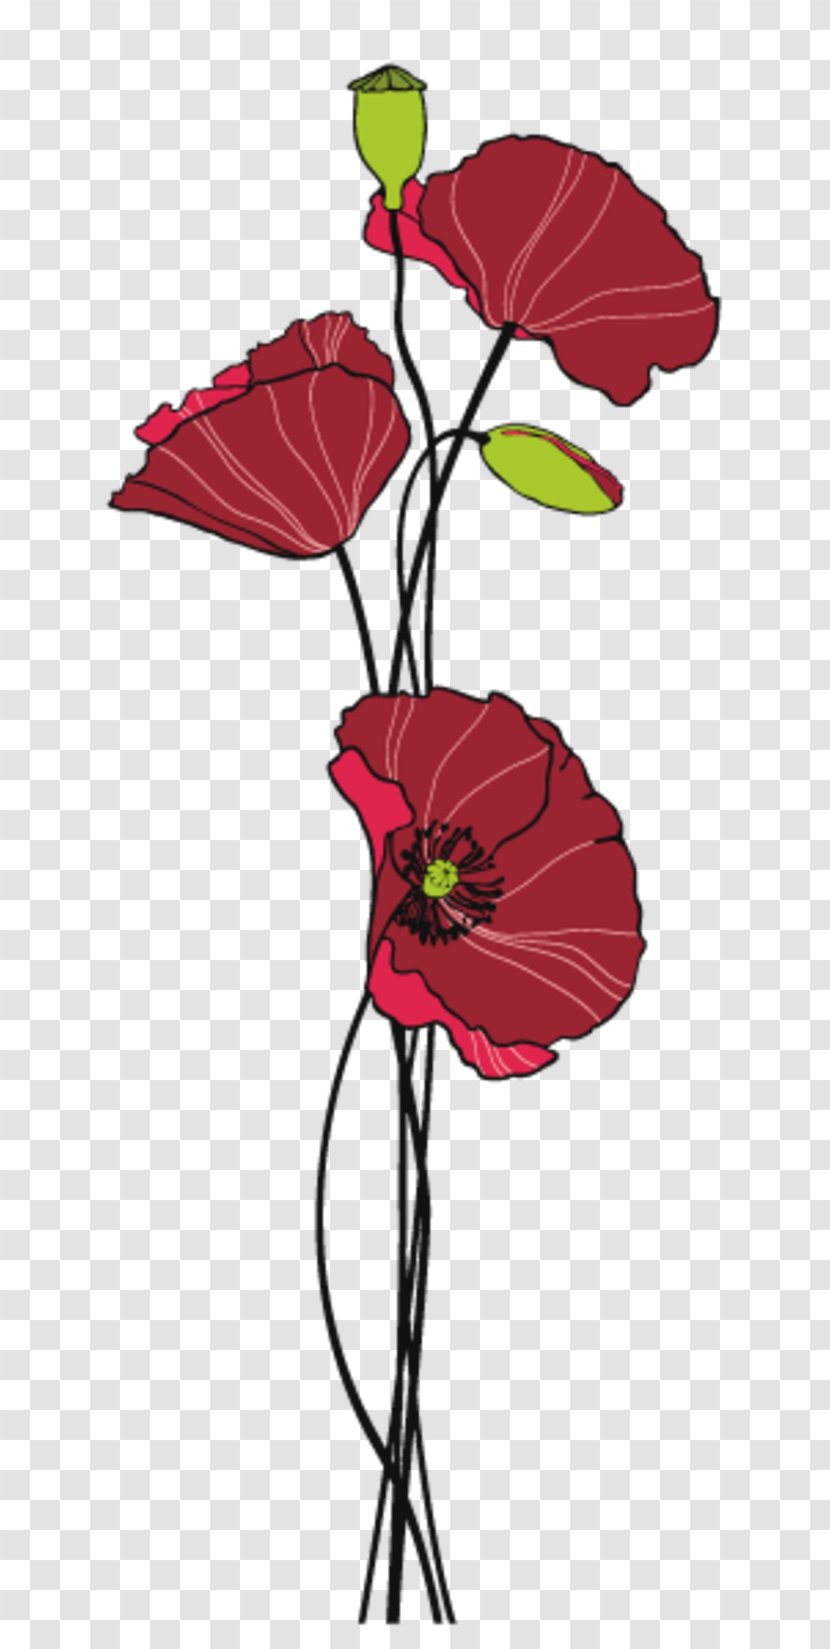 Sticker Flower Painting Common Poppy Image - Stickers Center Transparent PNG